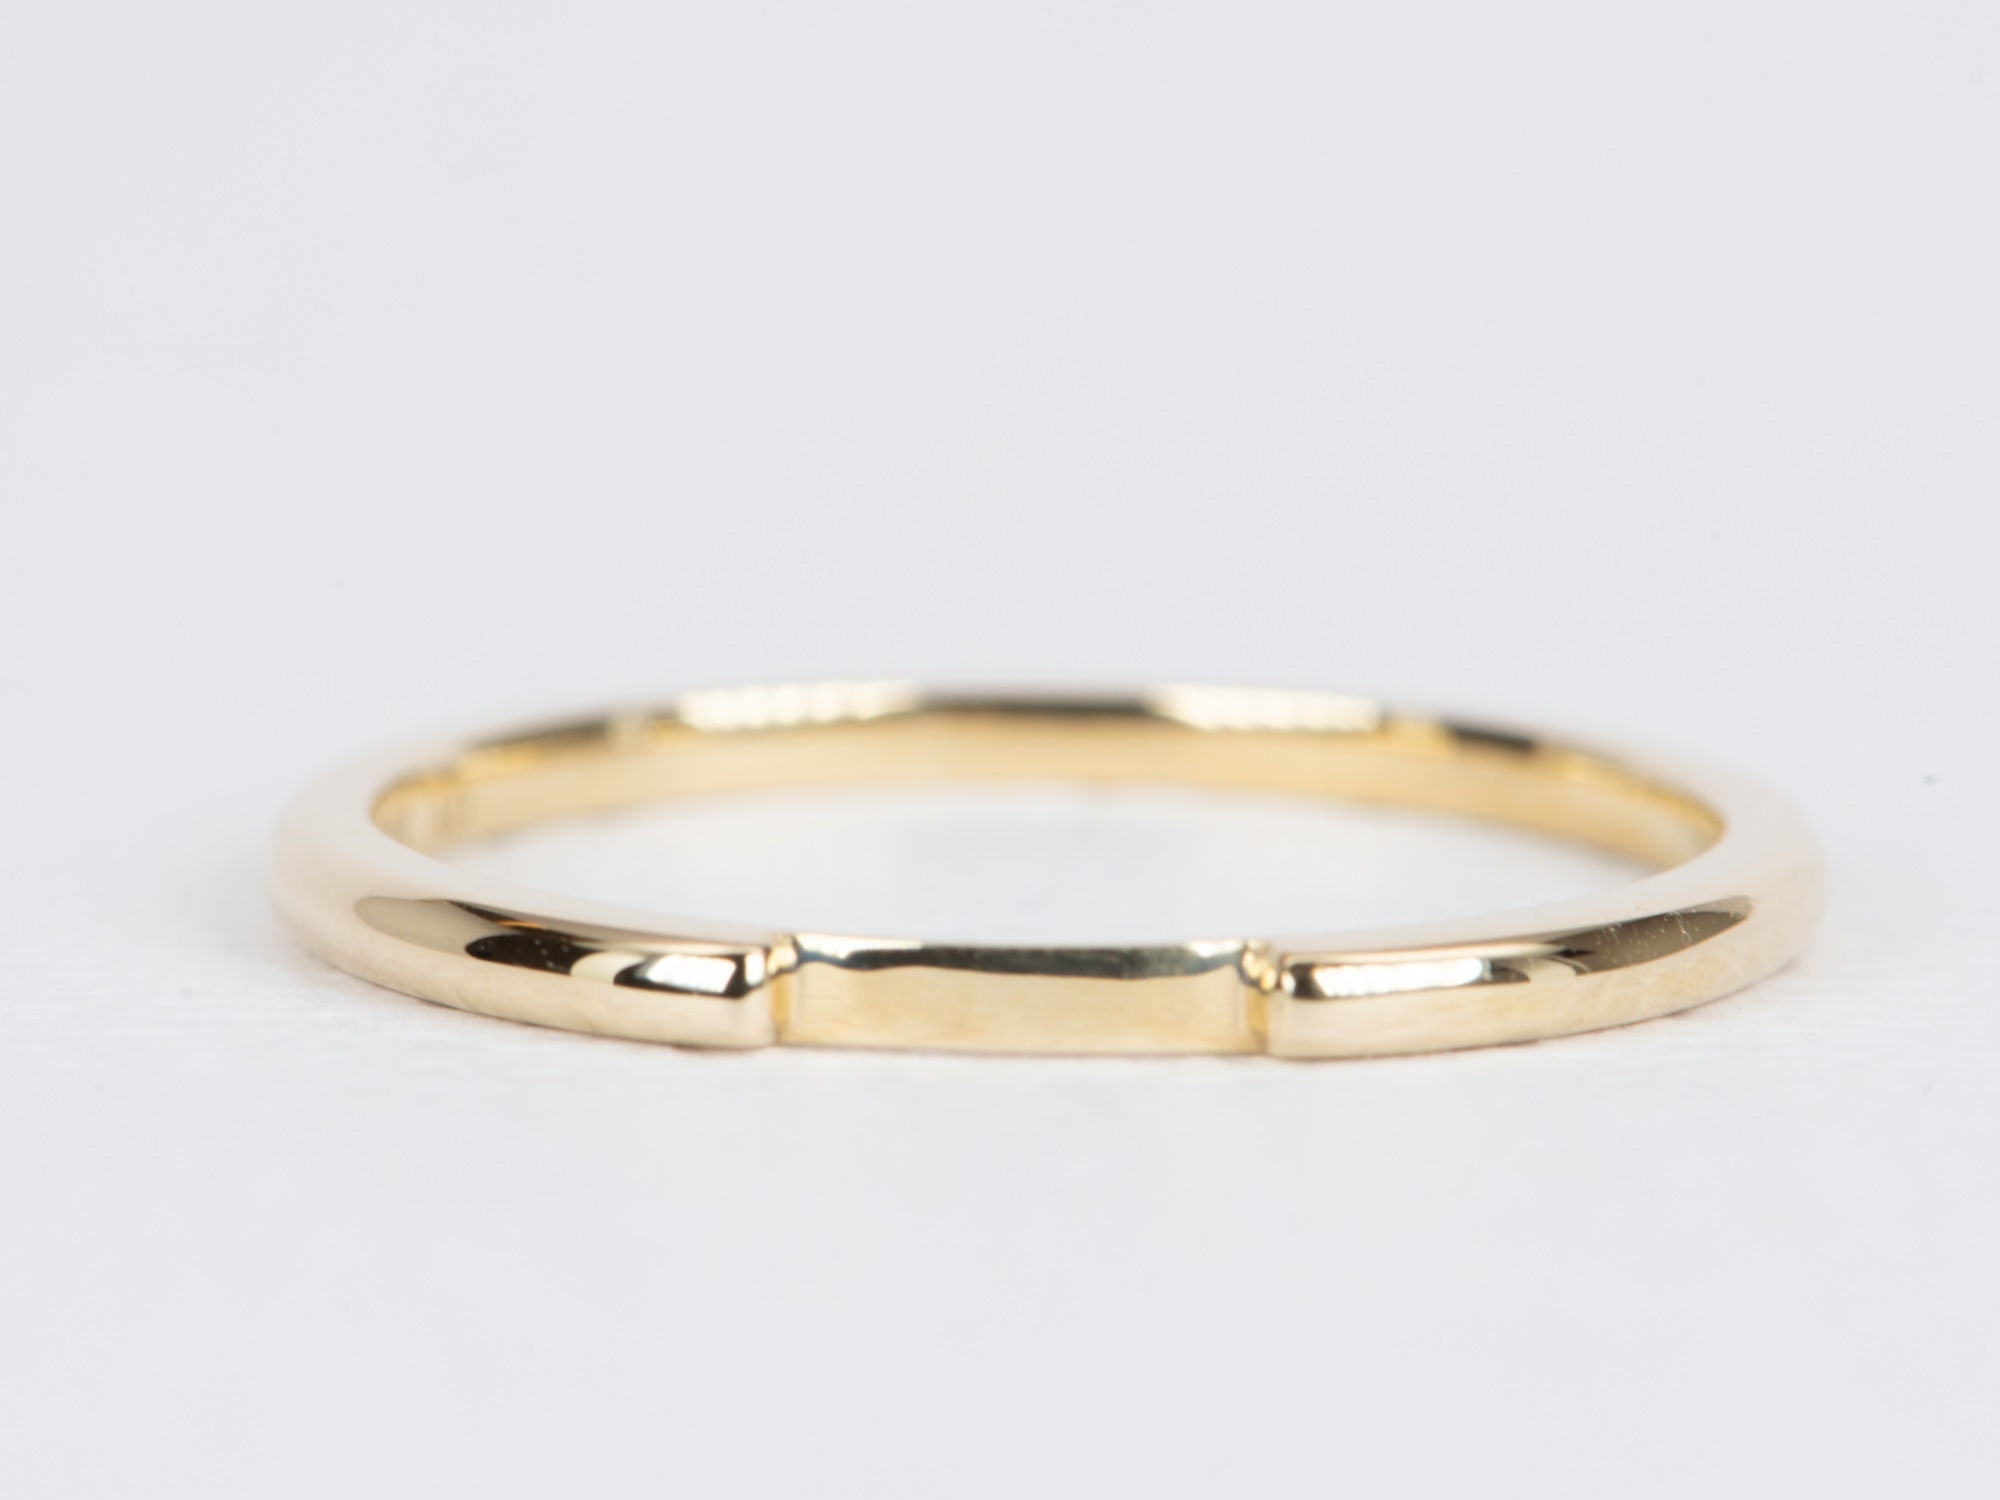 Solid White Gold Ring Spacer or Ring Guard, Thin Gold Ring, Thin